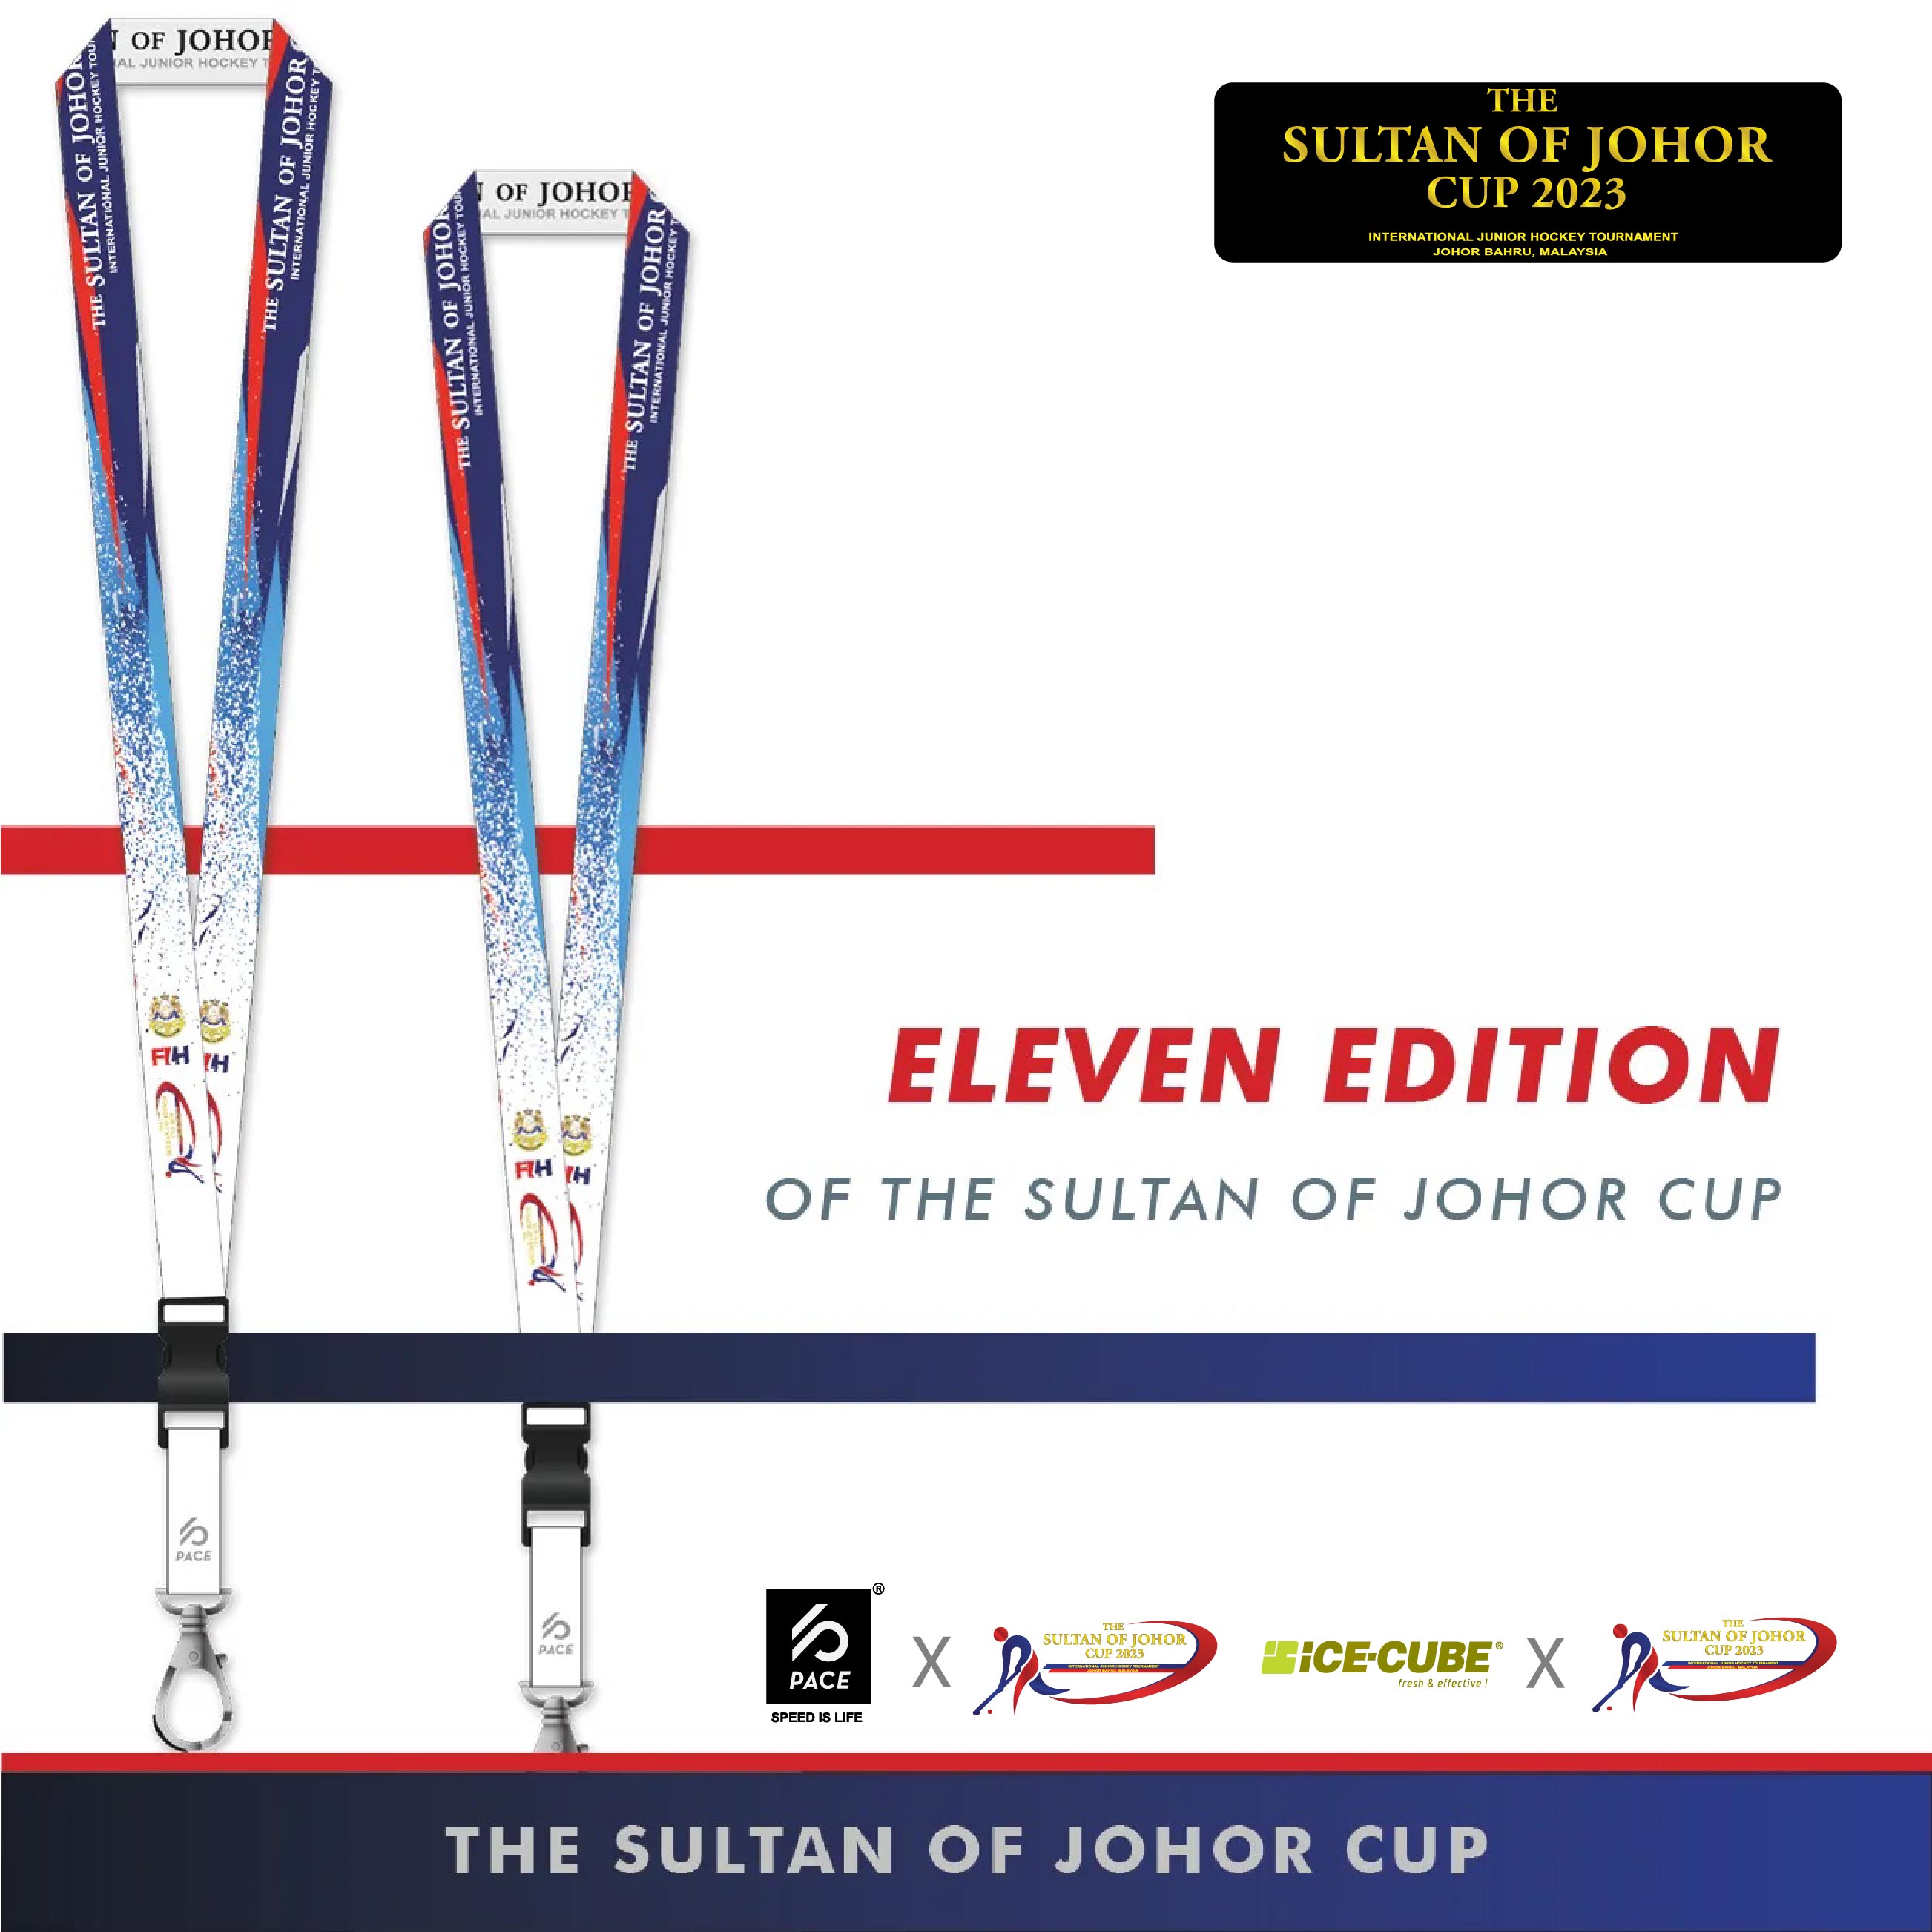 THE SULTAN OF JOHOR CUP - LANYARD